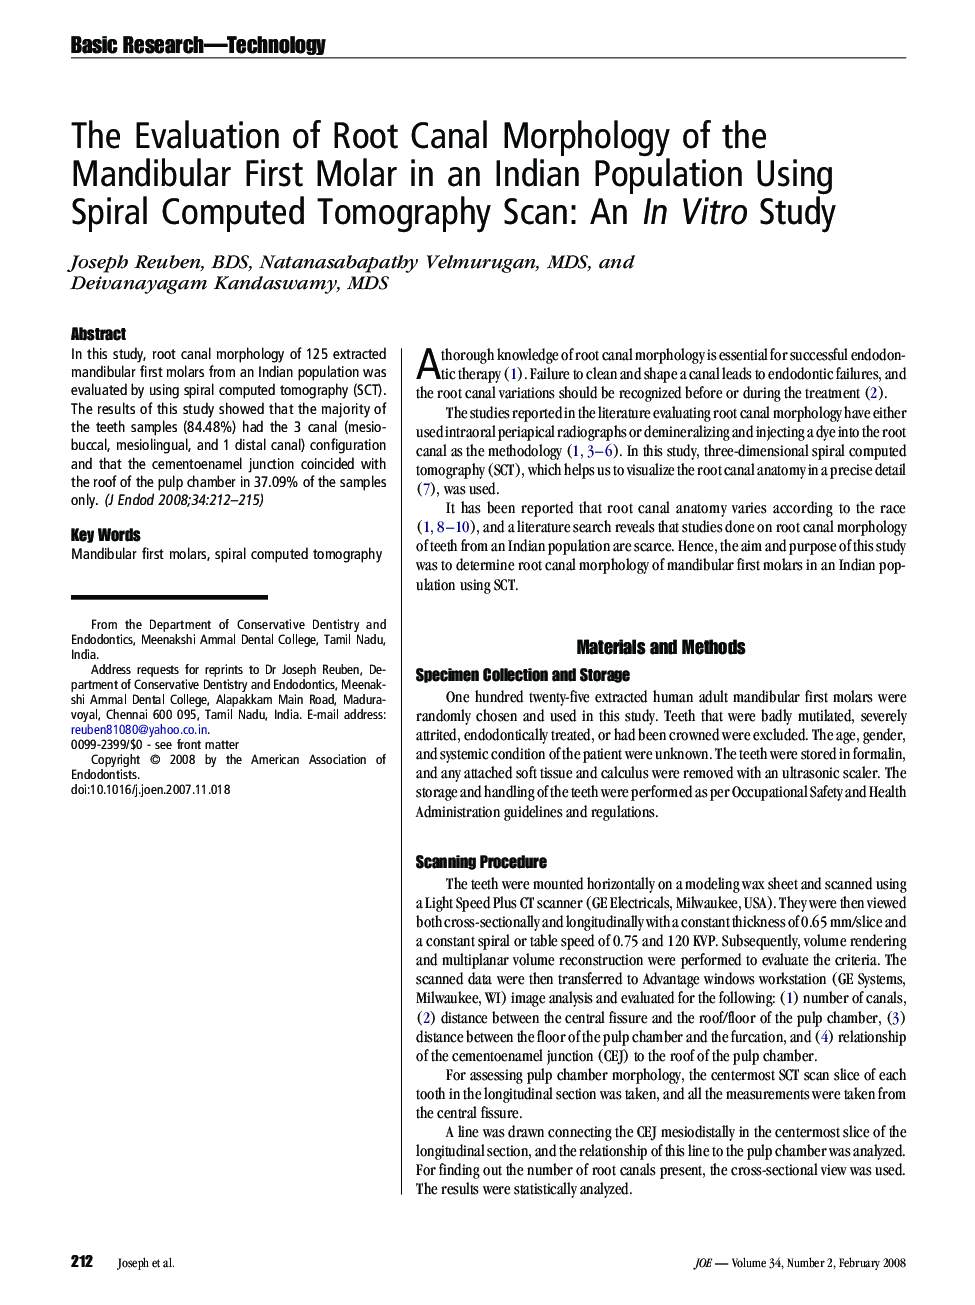 The Evaluation of Root Canal Morphology of the Mandibular First Molar in an Indian Population Using Spiral Computed Tomography Scan: An In Vitro Study